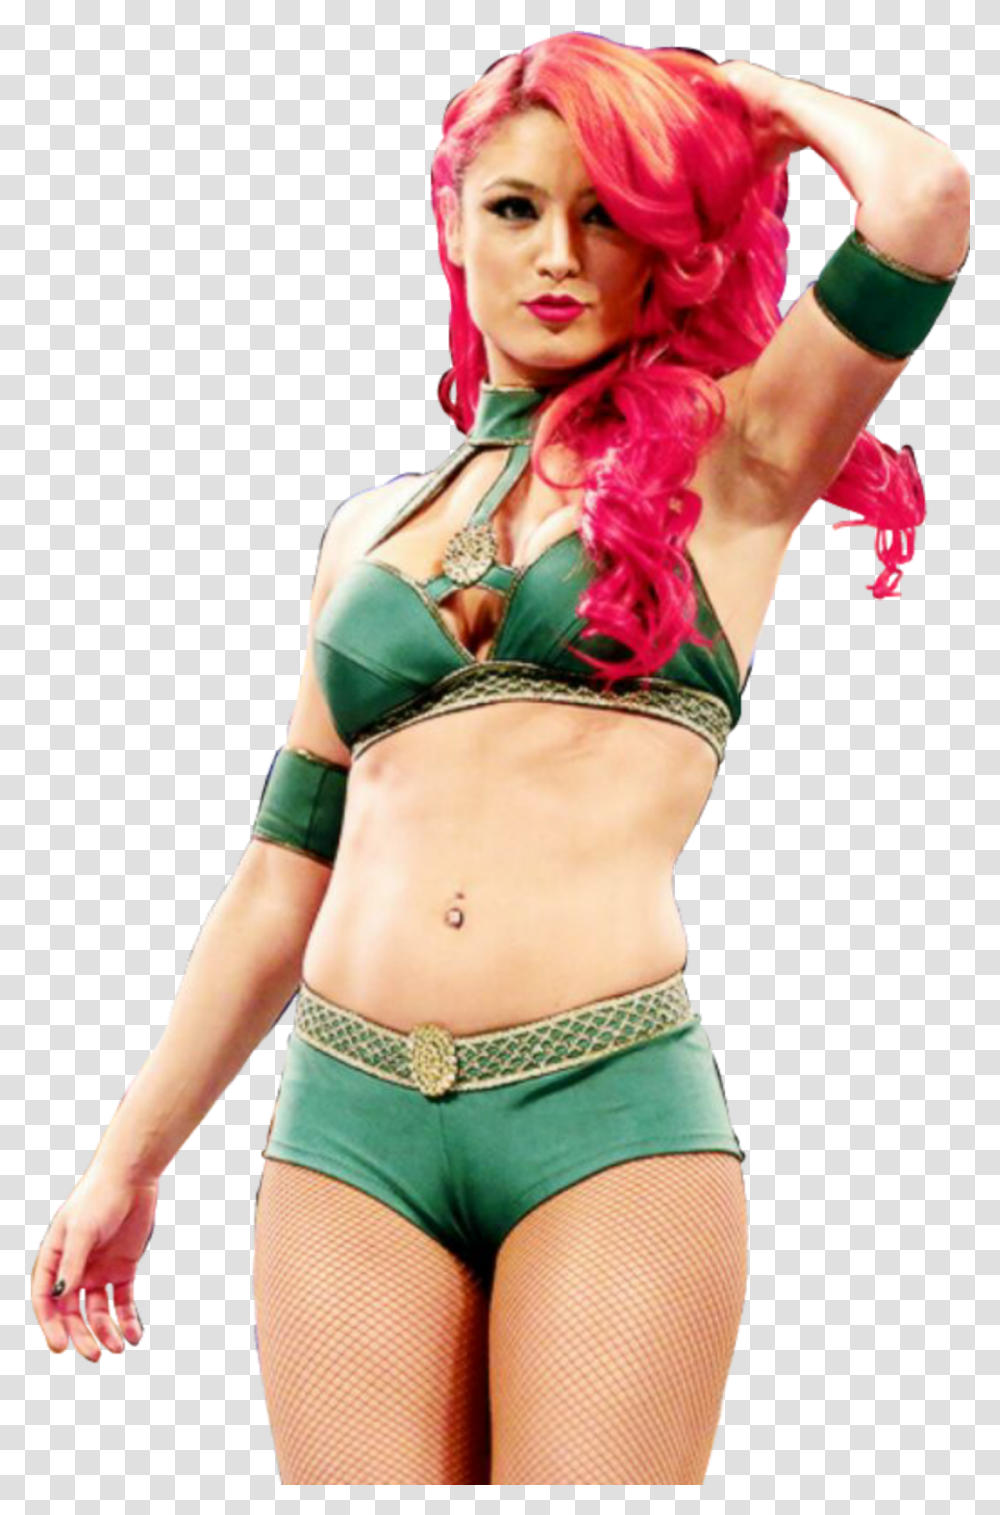 Evamarie Natalieevamarie Nataliecoyle Allredeverything Wwe Camel Toes Sexy, Person, Lingerie, Underwear Transparent Png